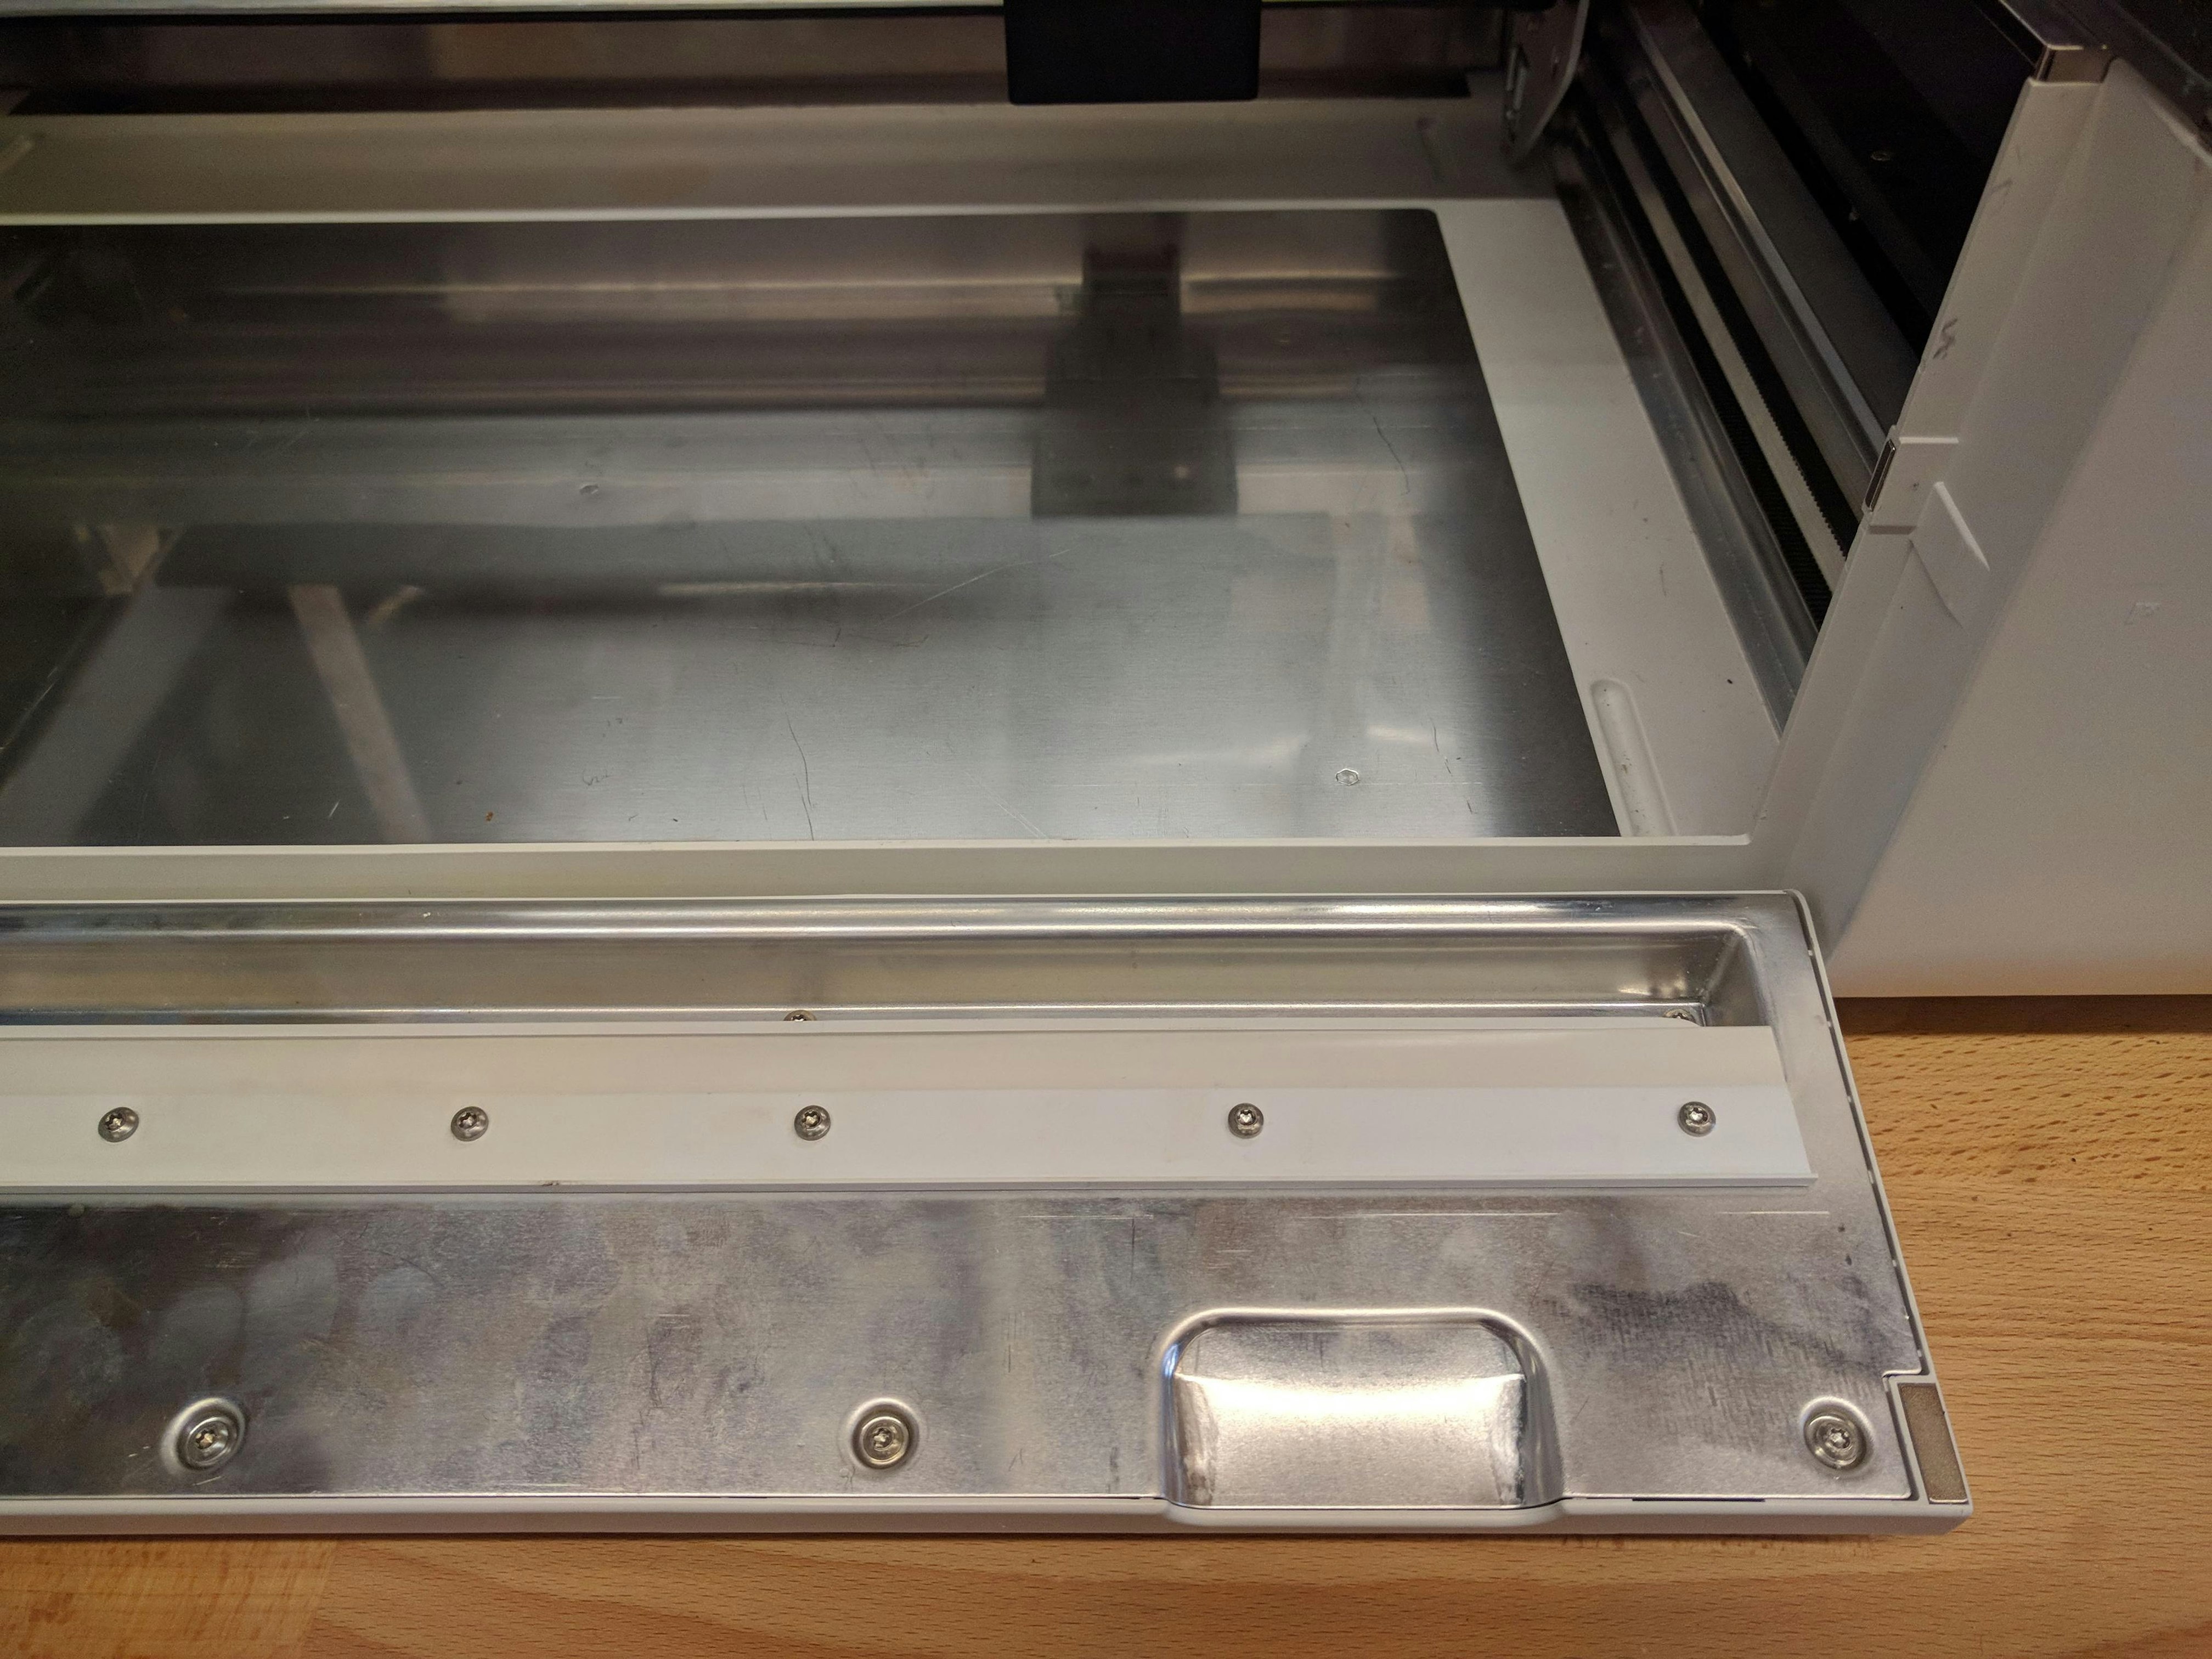 The right side of the open front door of the Glowforge. There is no debris present and the door is undamaged.